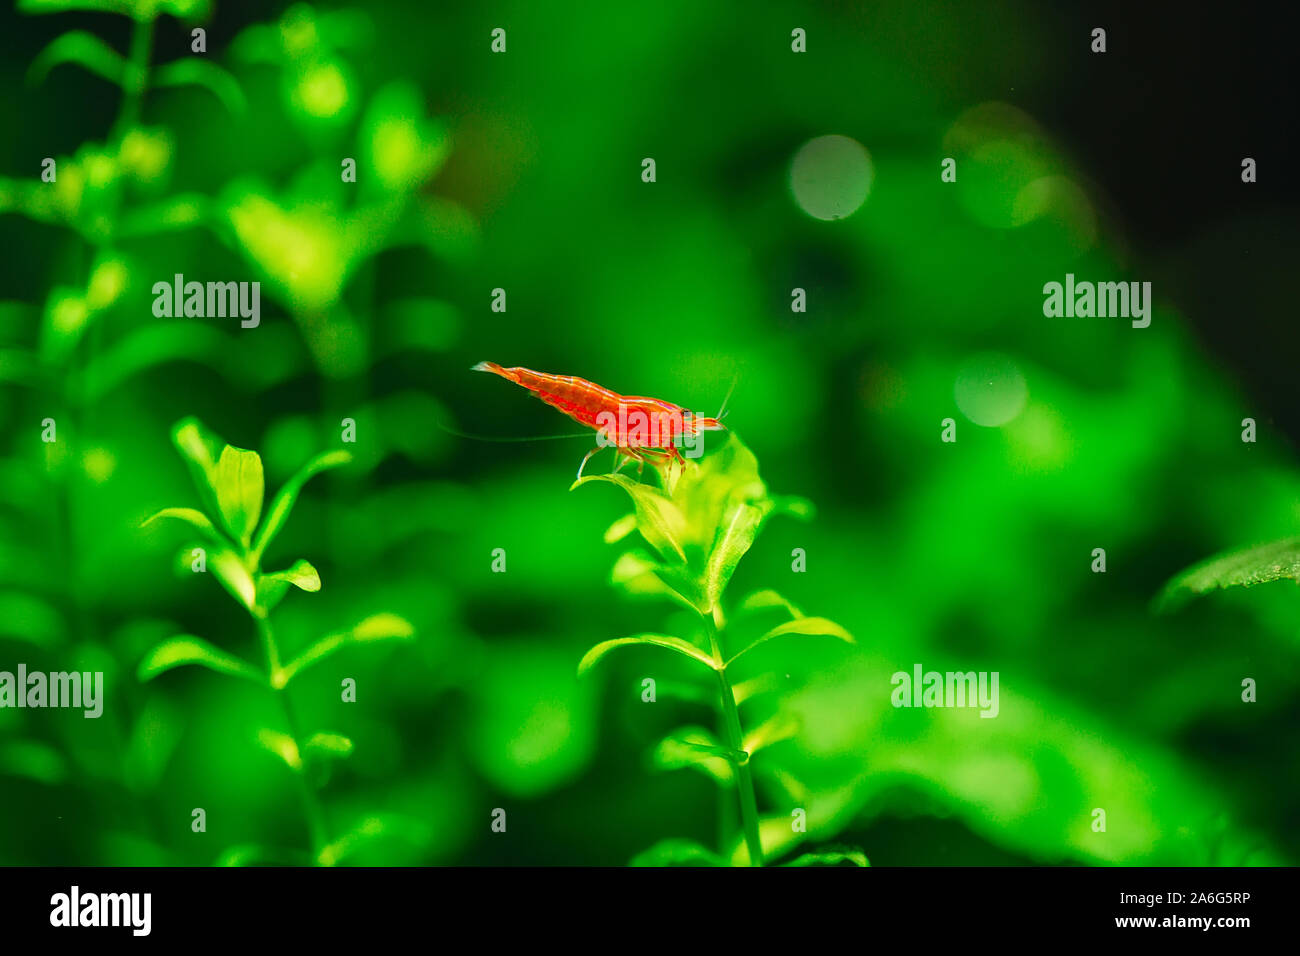 Big fire red or cherry dwarf shrimp with green background in fresh water aquarium tank Stock Photo